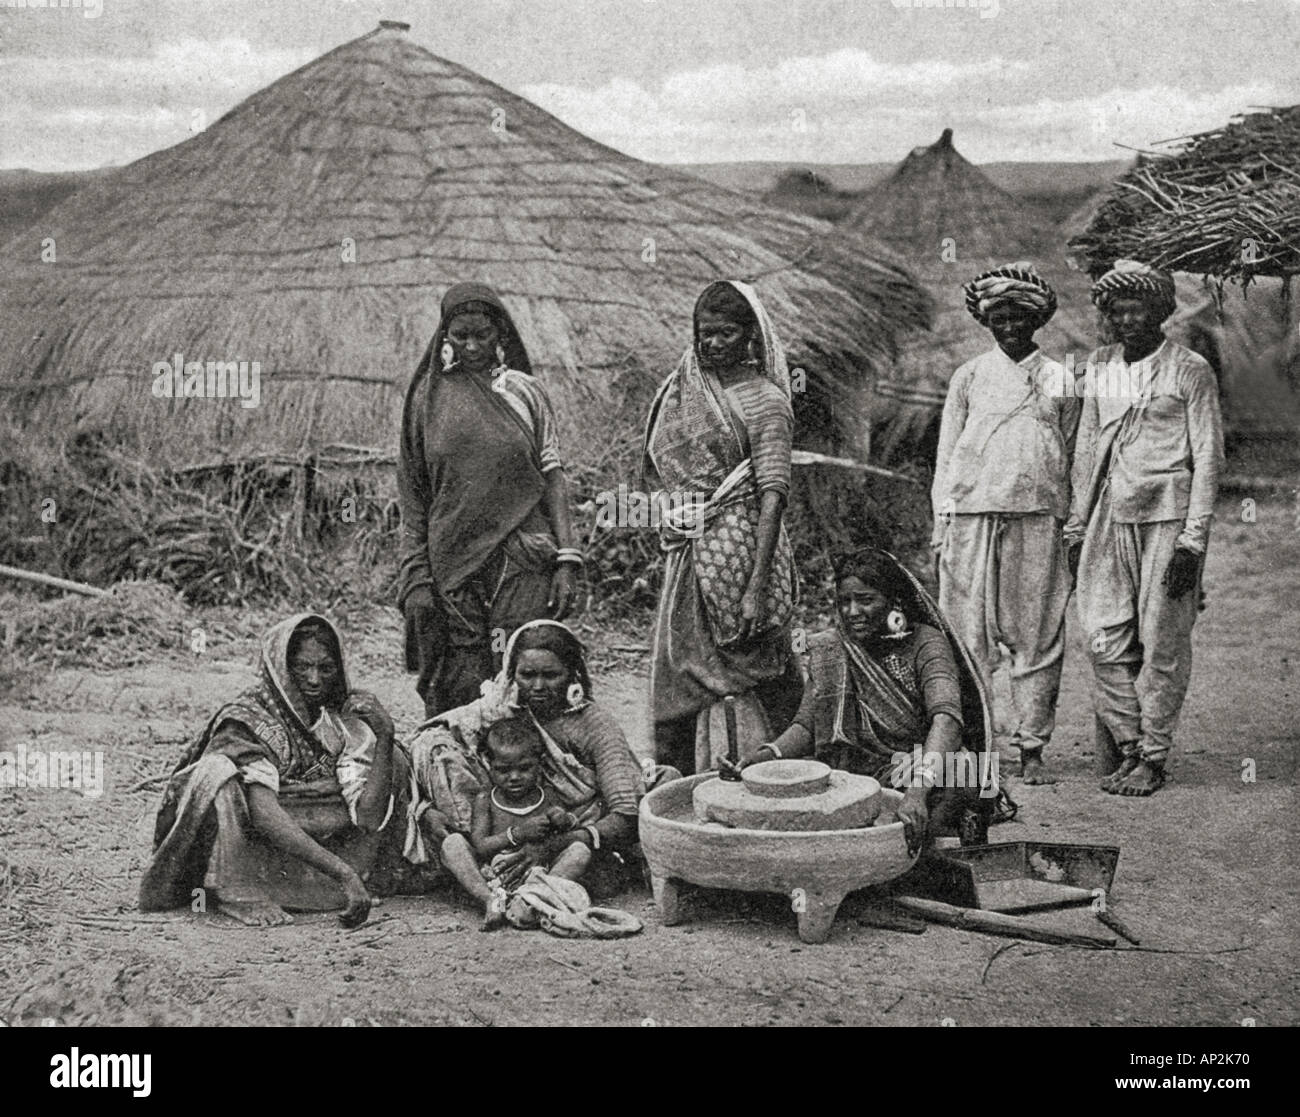 Bhil Tribe tribal people men women children of Gujarat with grinding stone in front of thatched roof hut India Asia old vintage 1900s picture Stock Photo